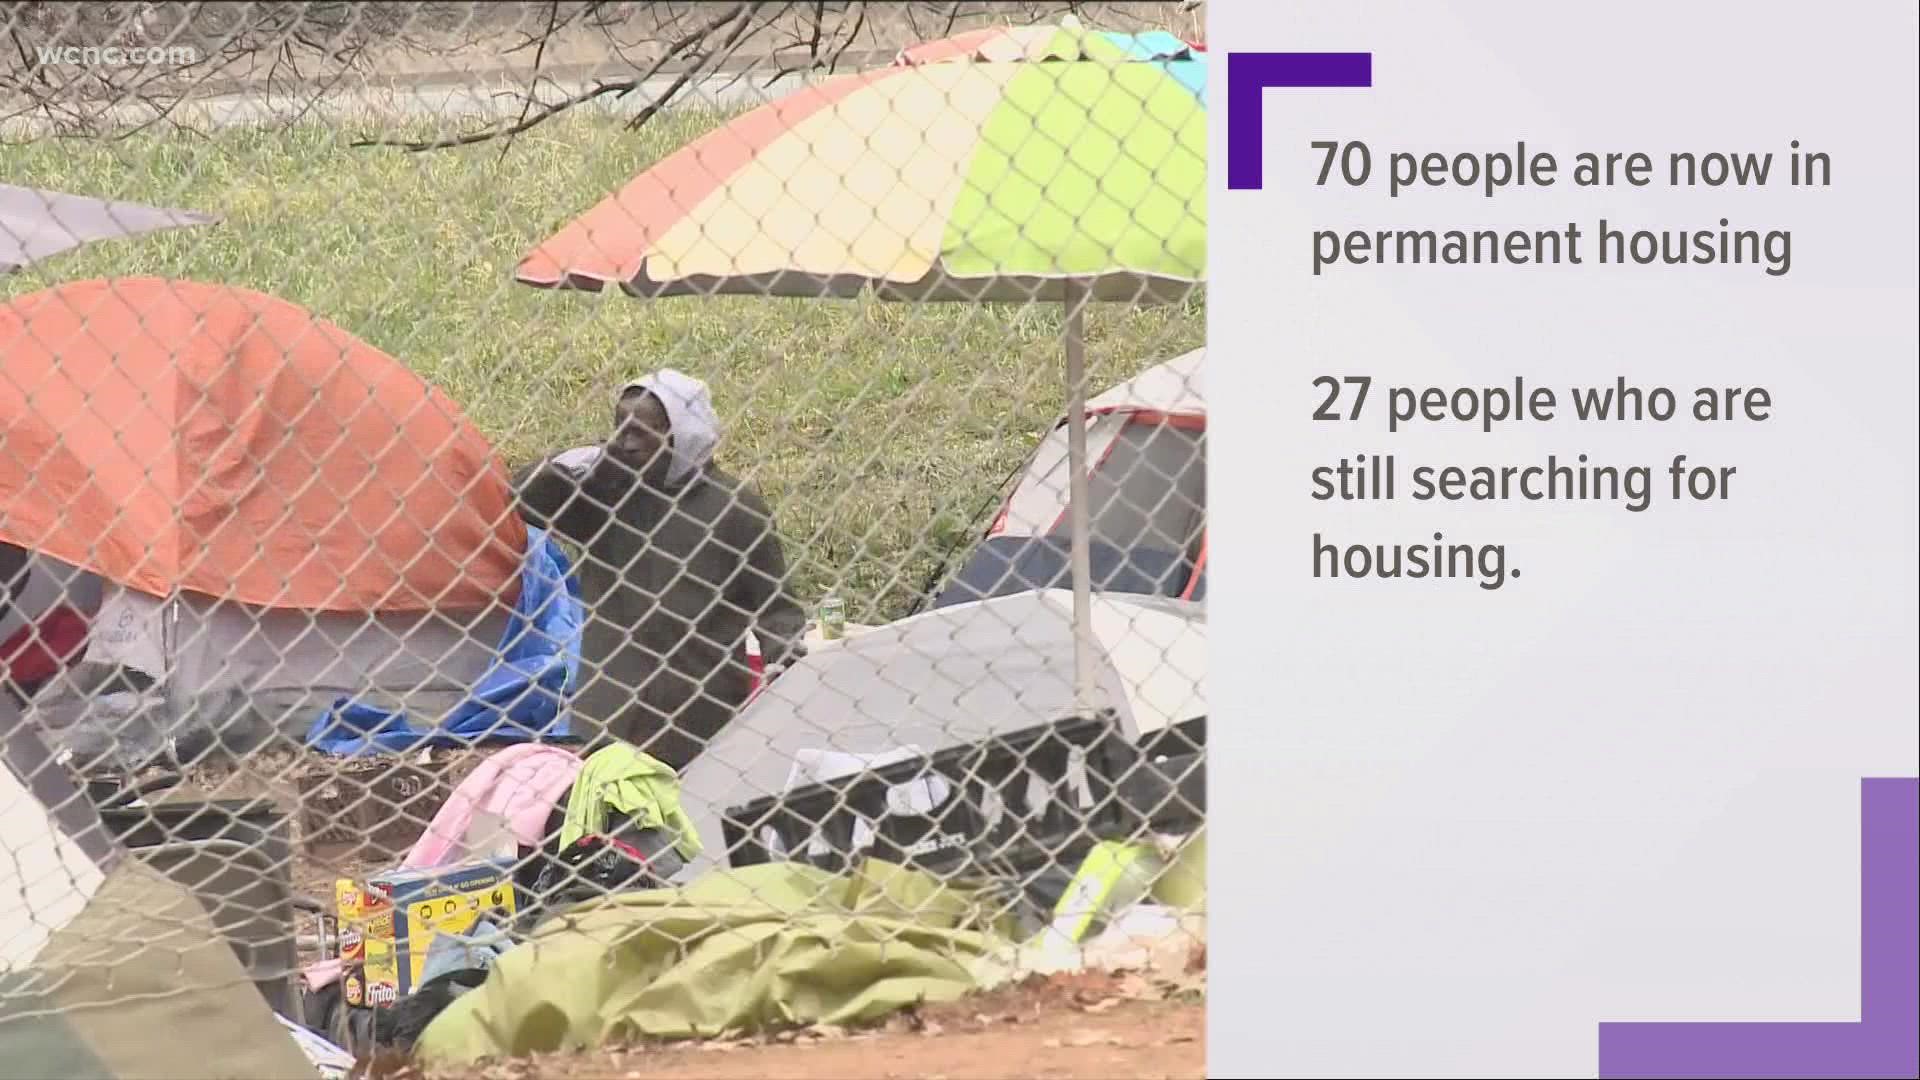 The county said there are 27 people remaining who are still searching for housing.